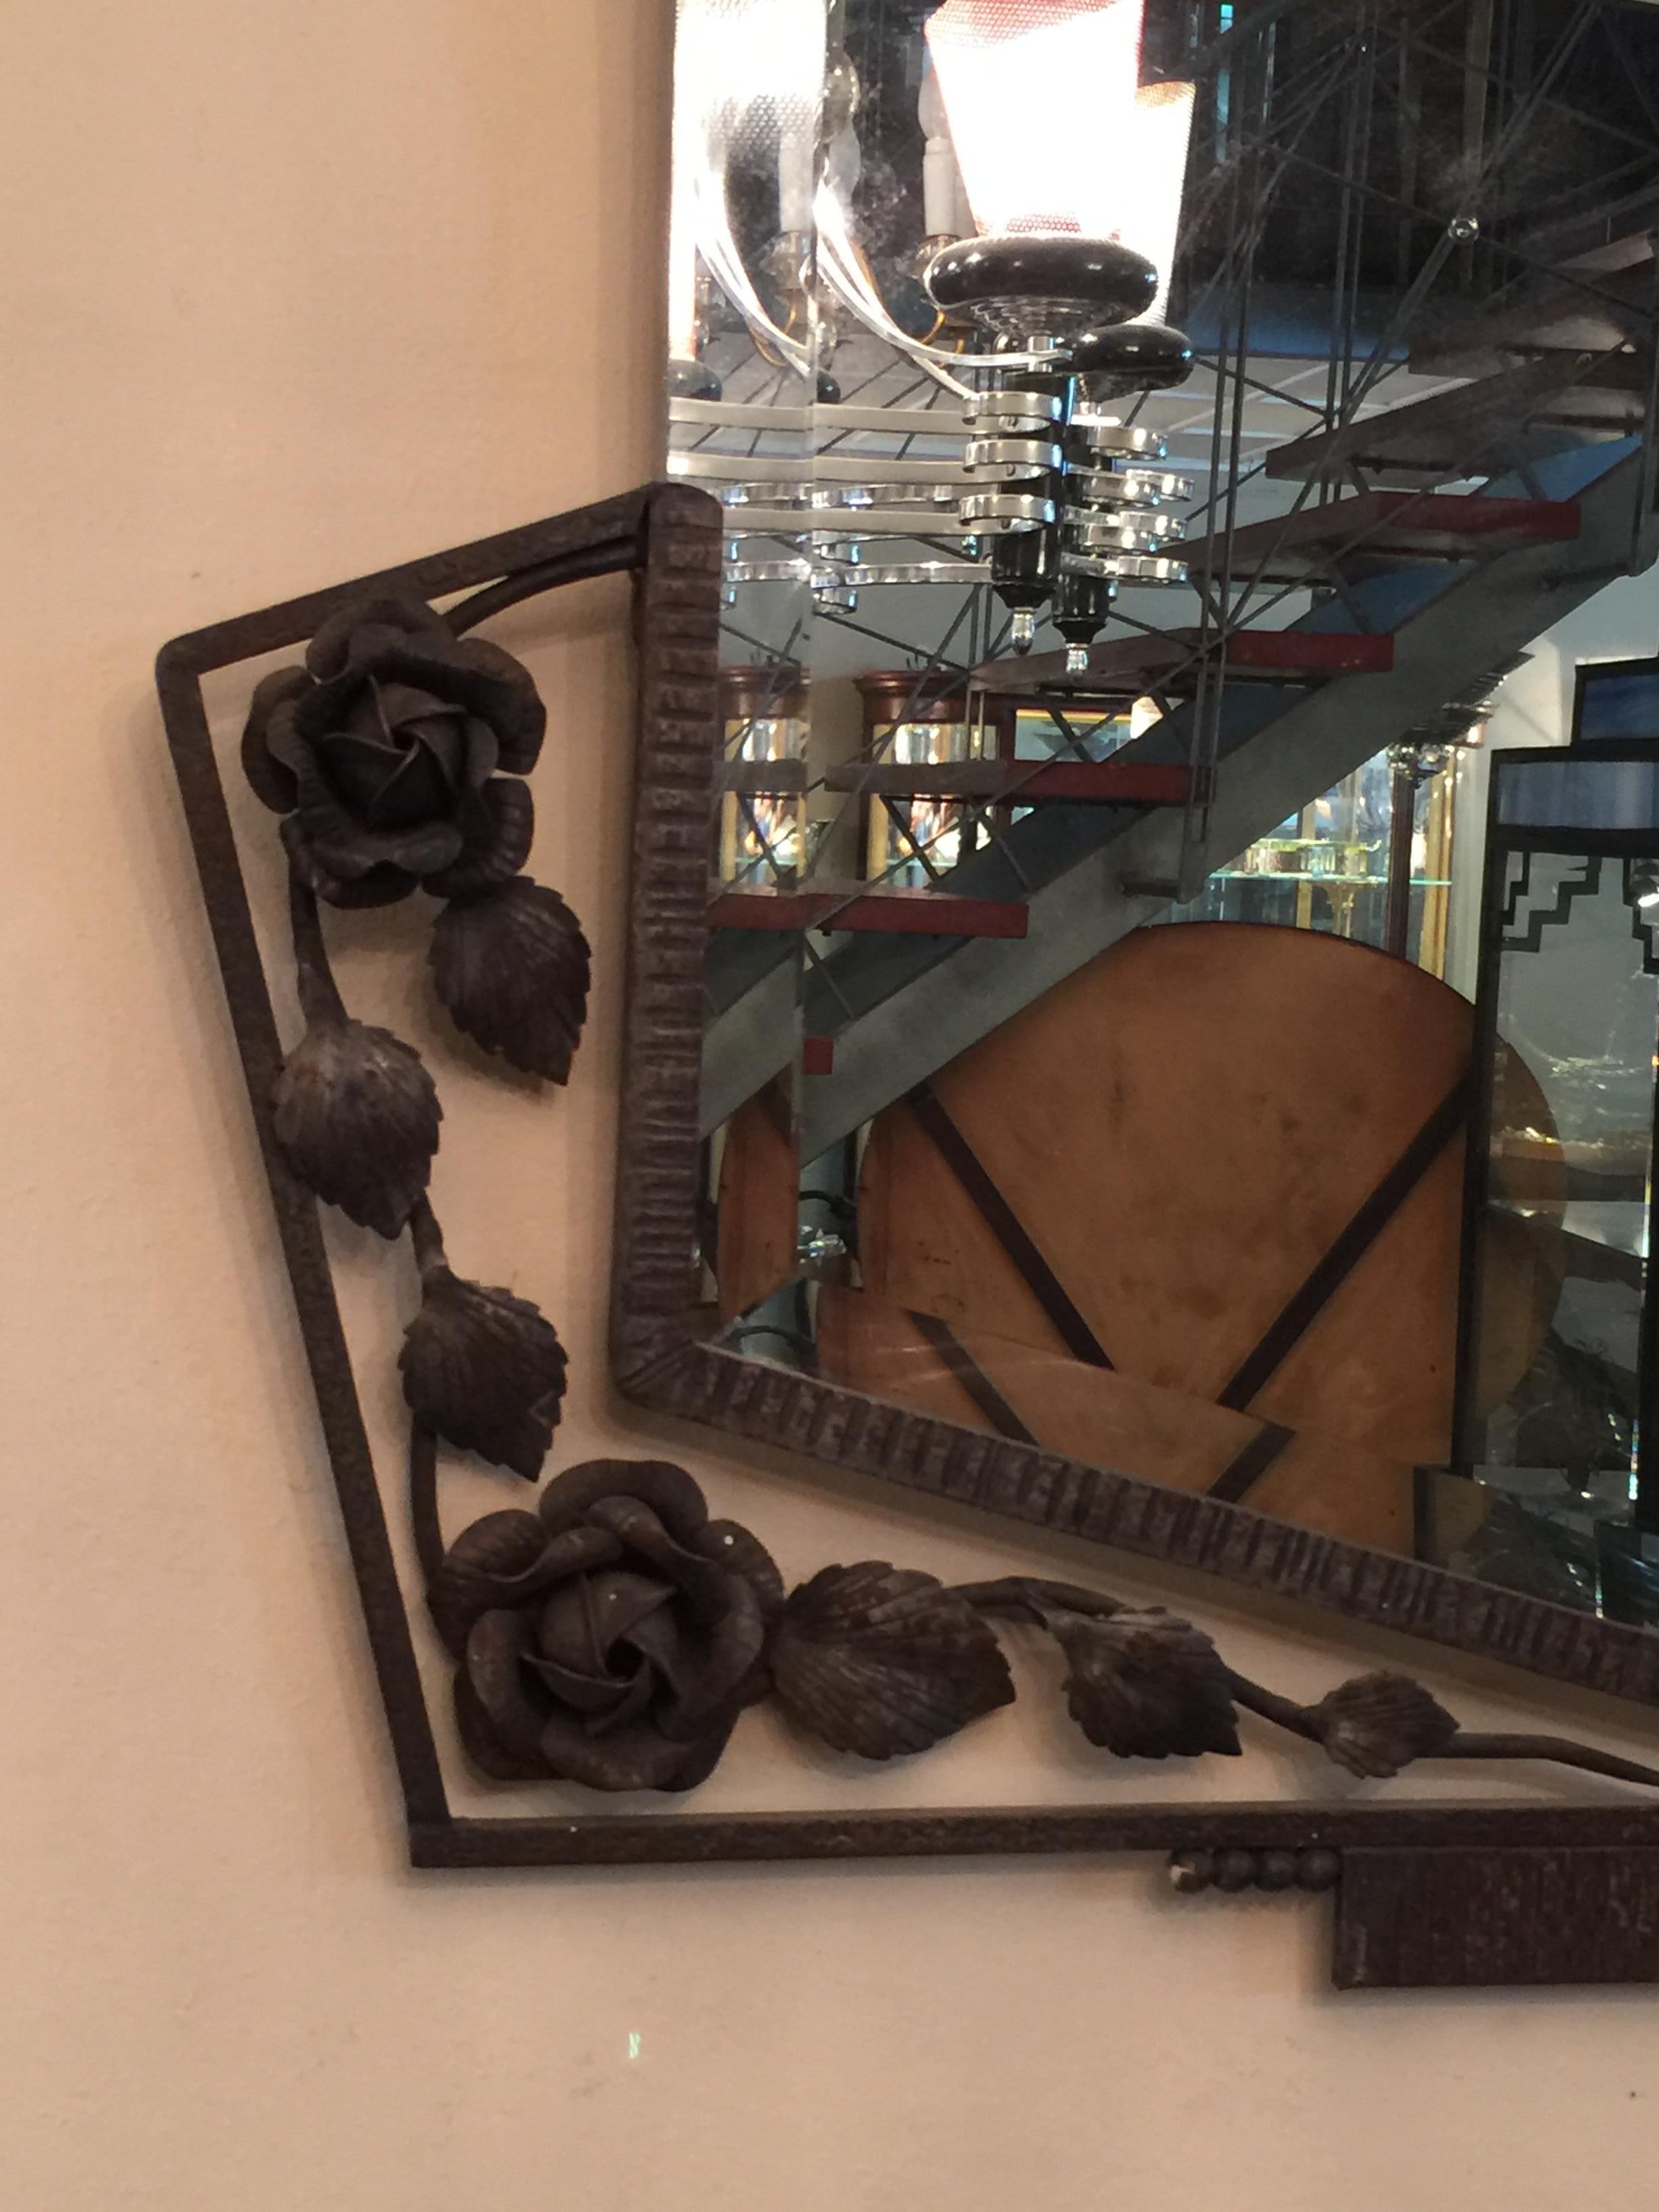 Amaizing mirror

Material: iron and mirror
Style: Art Deco
Country: France
If you want to live in the golden years, this is the mirror that your project needs.
We have specialized in the sale of Art Deco and Art Nouveau and Vintage styles since